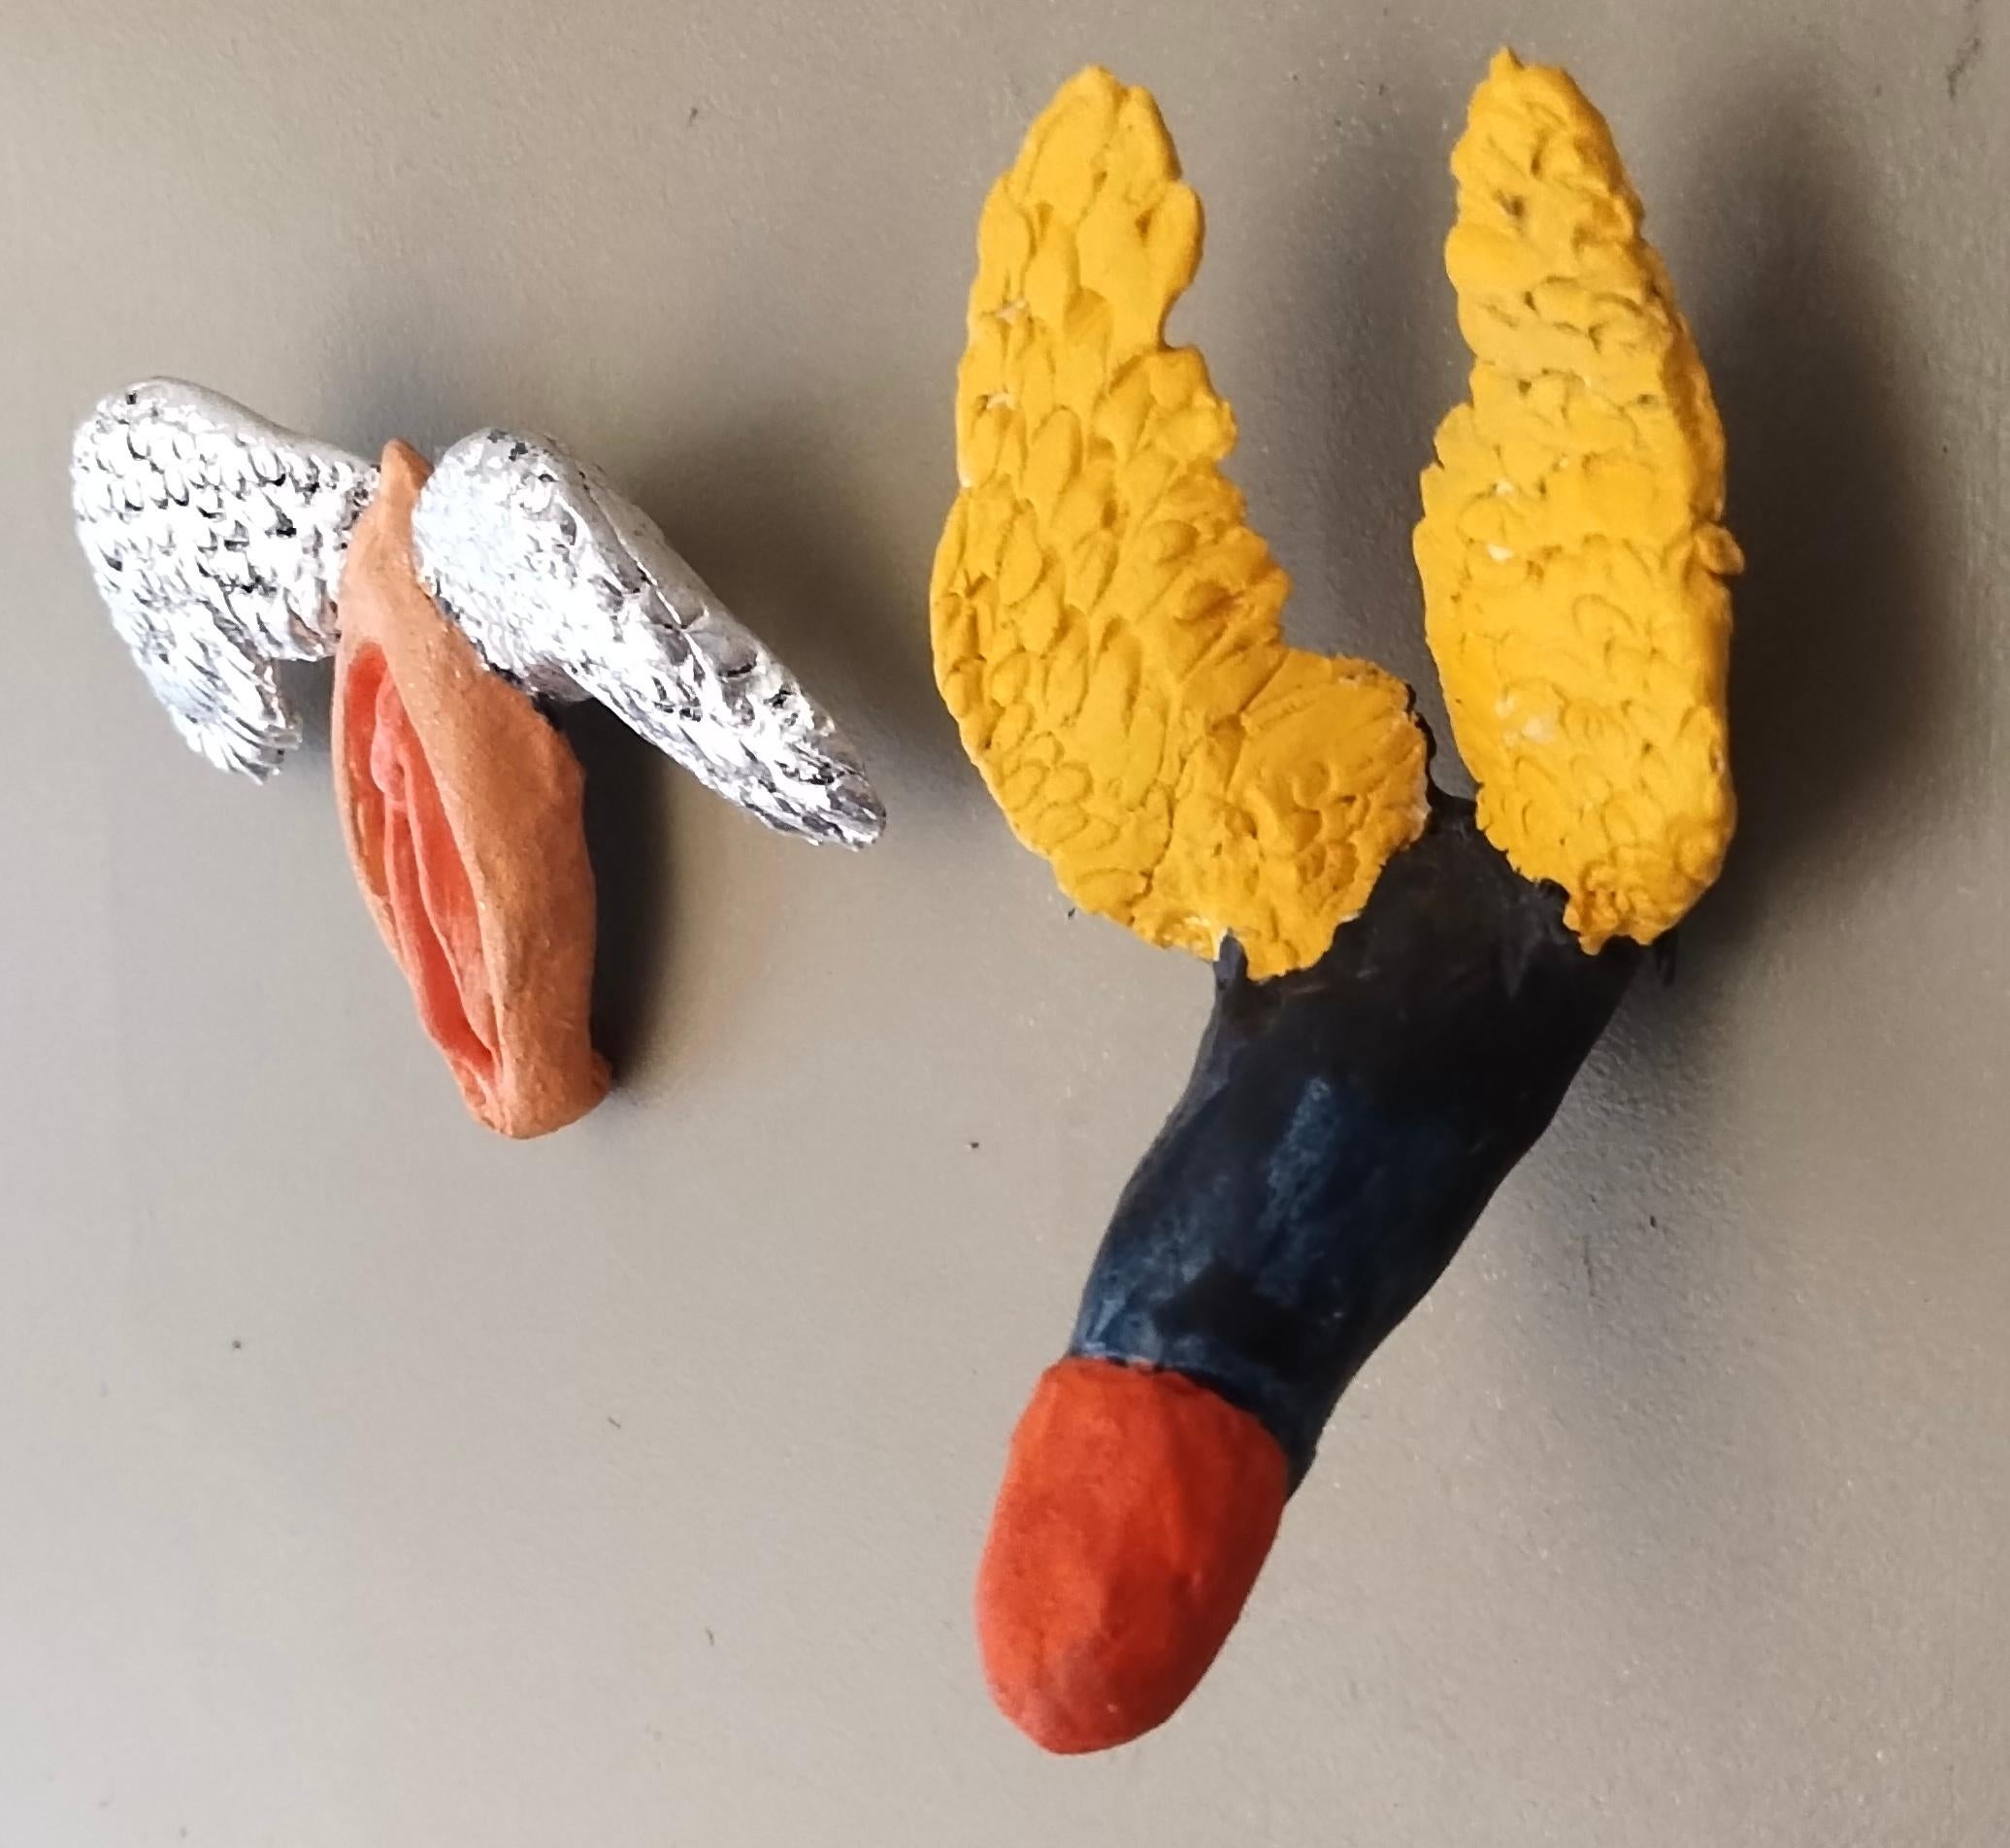 Artist: Jim Pallas (1941)
Title: Flying Phallus and Winged Vulva
Year: 2018
Medium: Pigmented epoxy on ceramic
Size: 3.5 x 4 inches, each
Condition: Excellent
Inscription: Signed and dated

JIM PALLAS (1941-) American painter, draughtsman, sculptor,